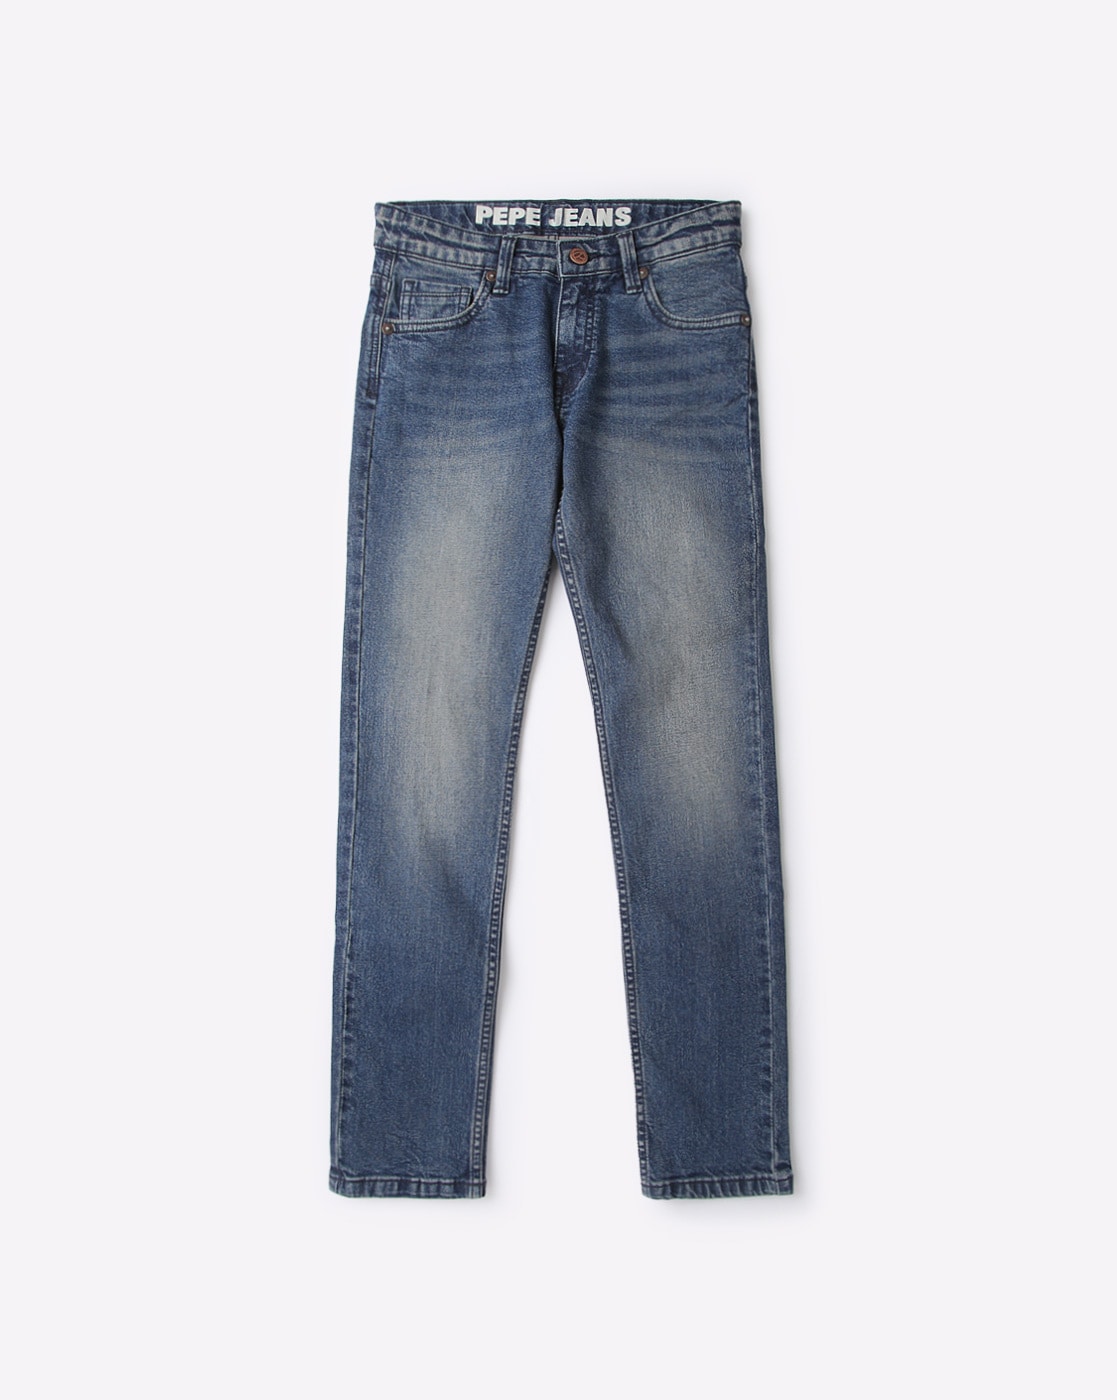 Buy Pepe Jeans Kids Blue Solid Jeans for Boys Clothing Online @ Tata CLiQ